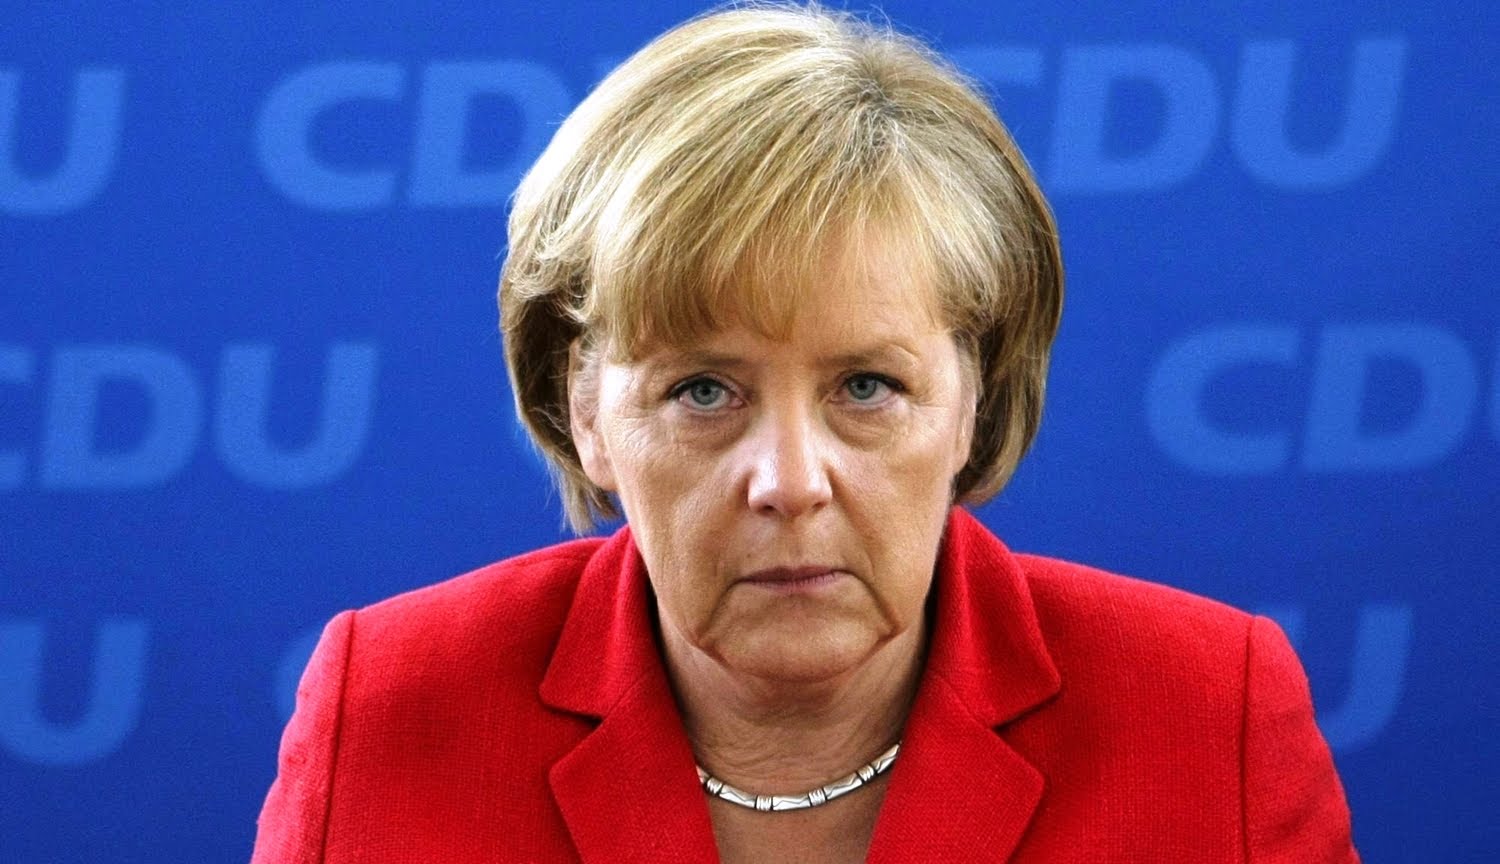 Russia’s participation in G7 not possible without return of Crimea to Ukraine – Merkel